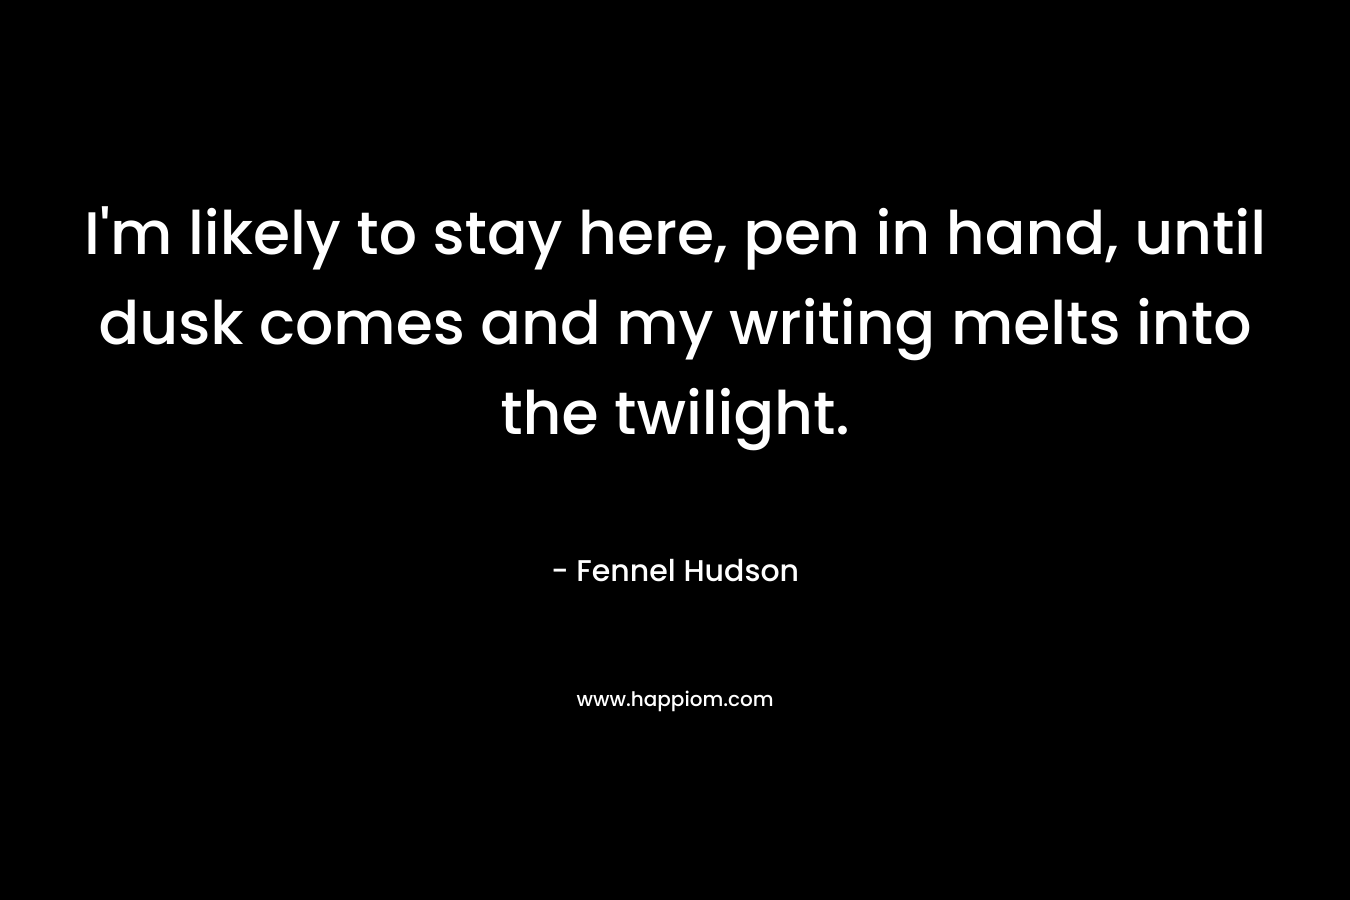 I'm likely to stay here, pen in hand, until dusk comes and my writing melts into the twilight.